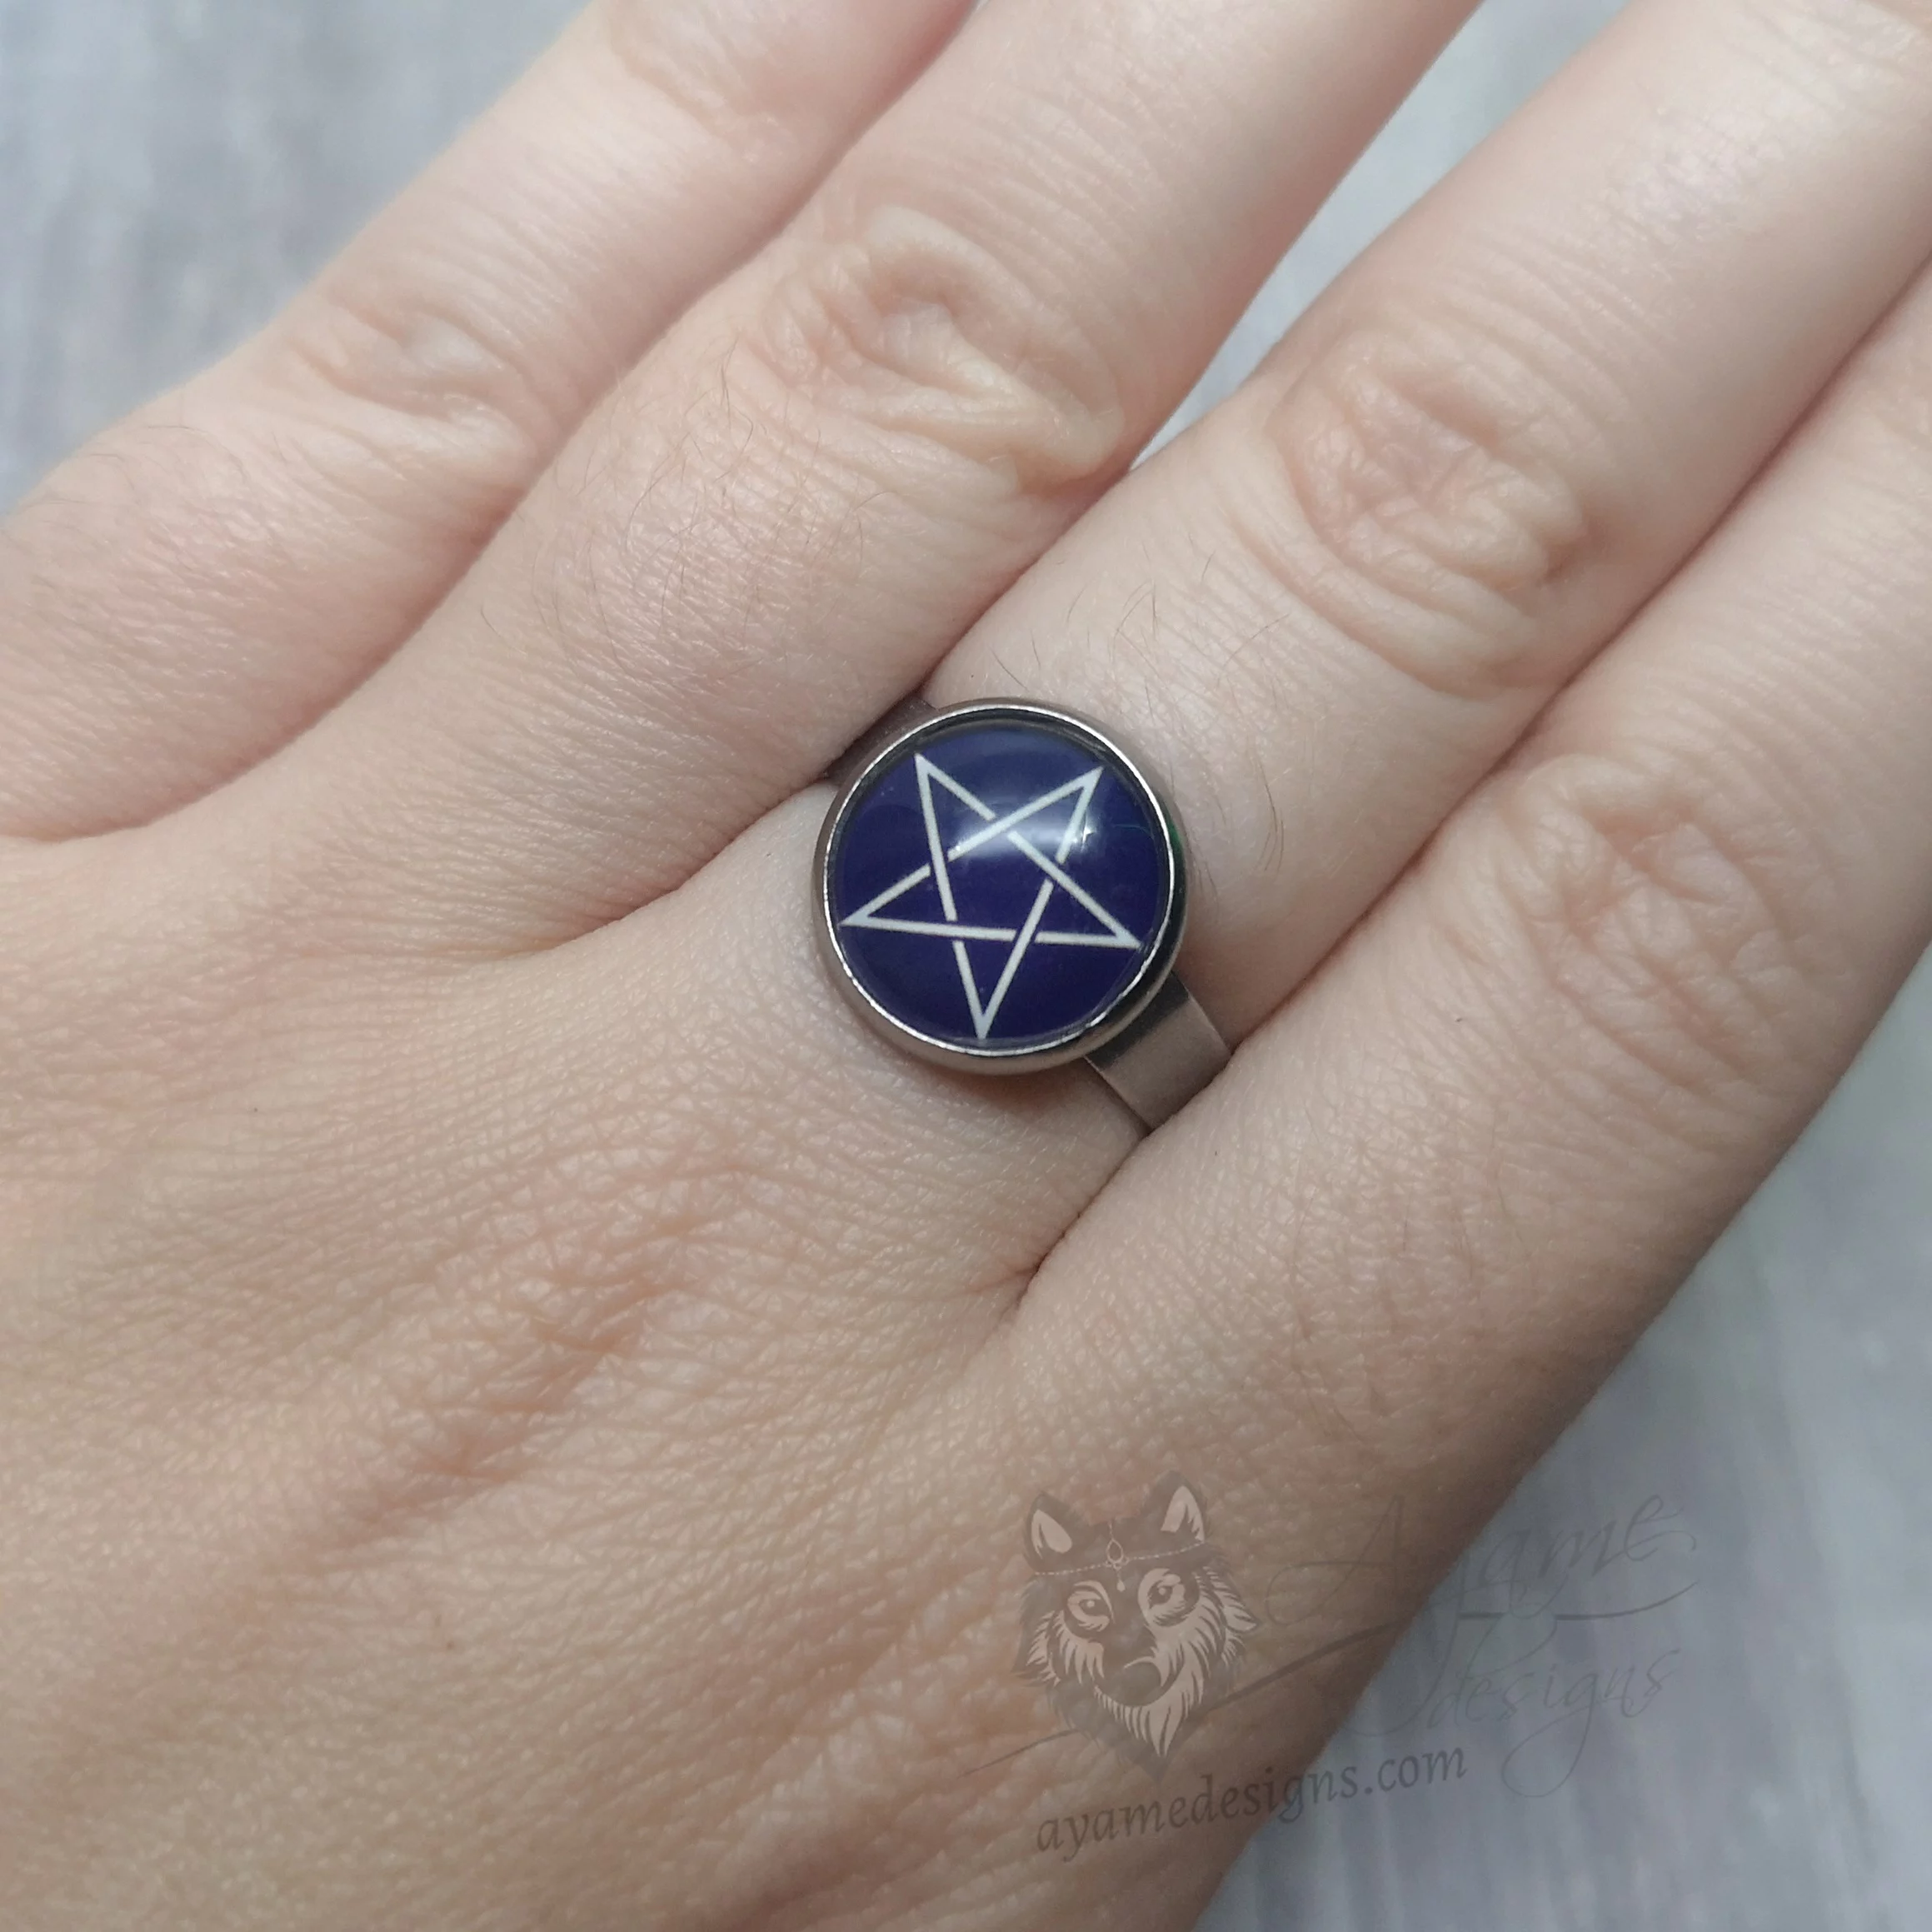 Adjustable stainless steel ring with glass pentagram cabochon